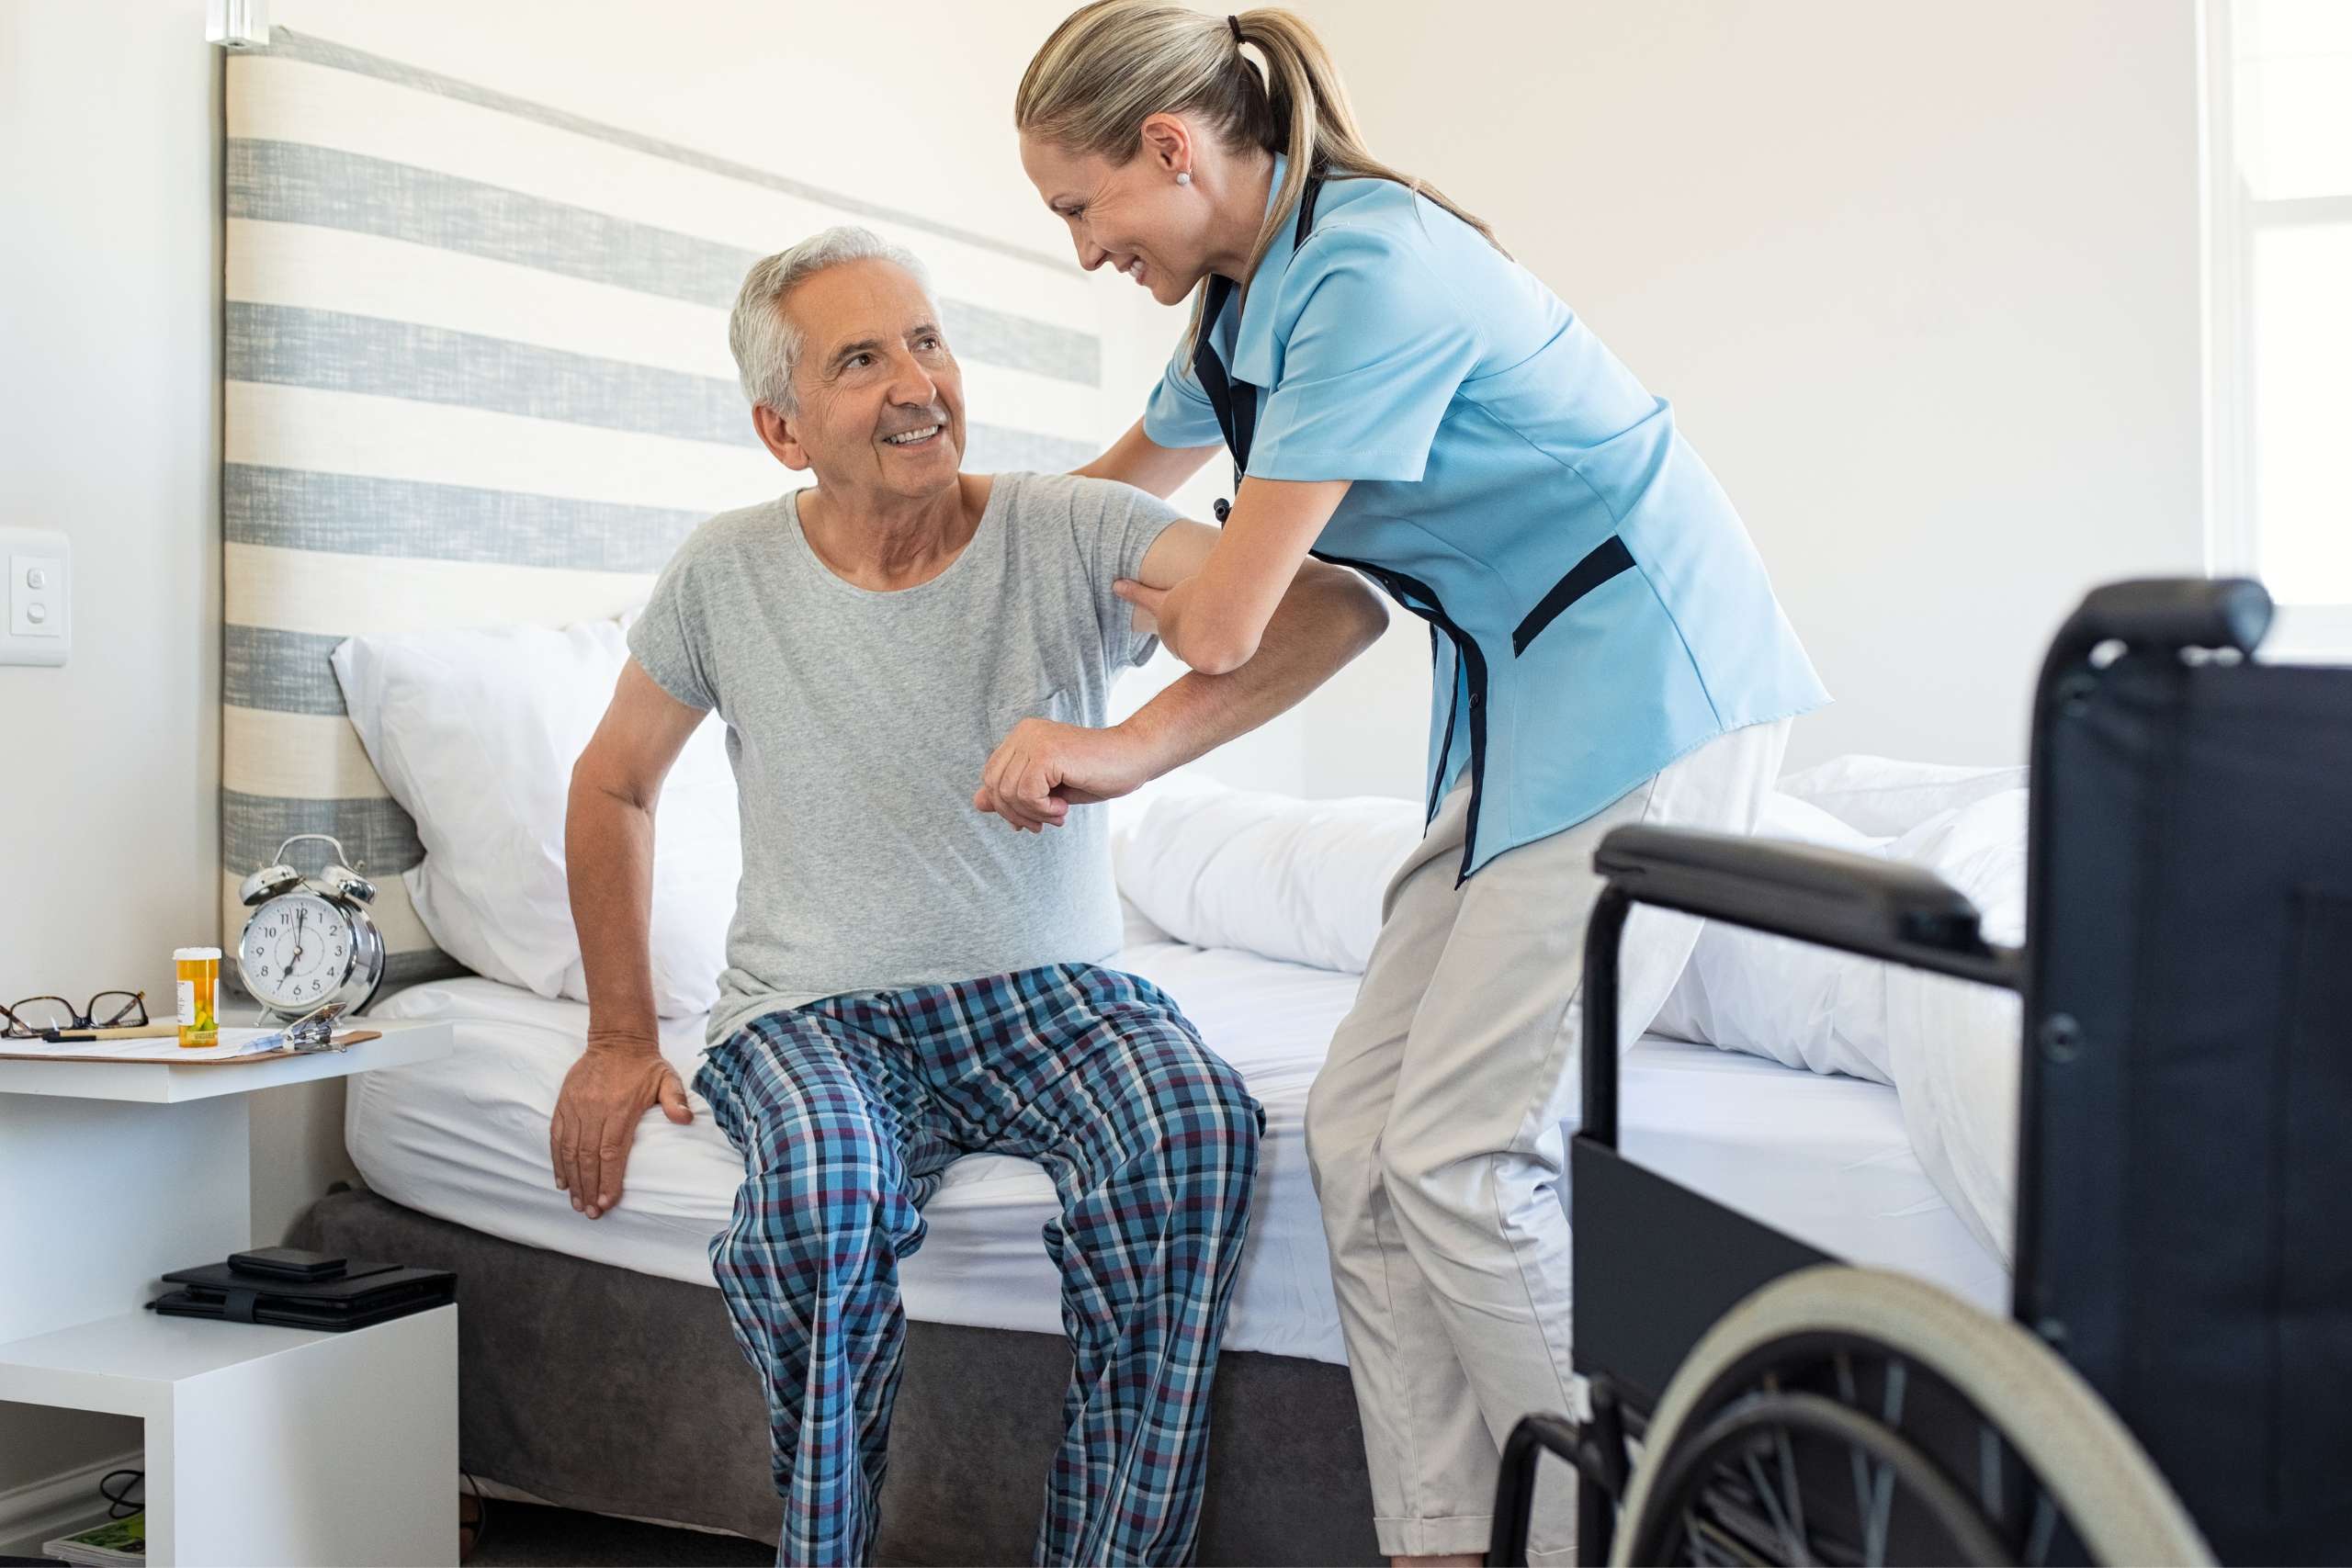 MIP Techniques: Resident Transfer by One Caregiver